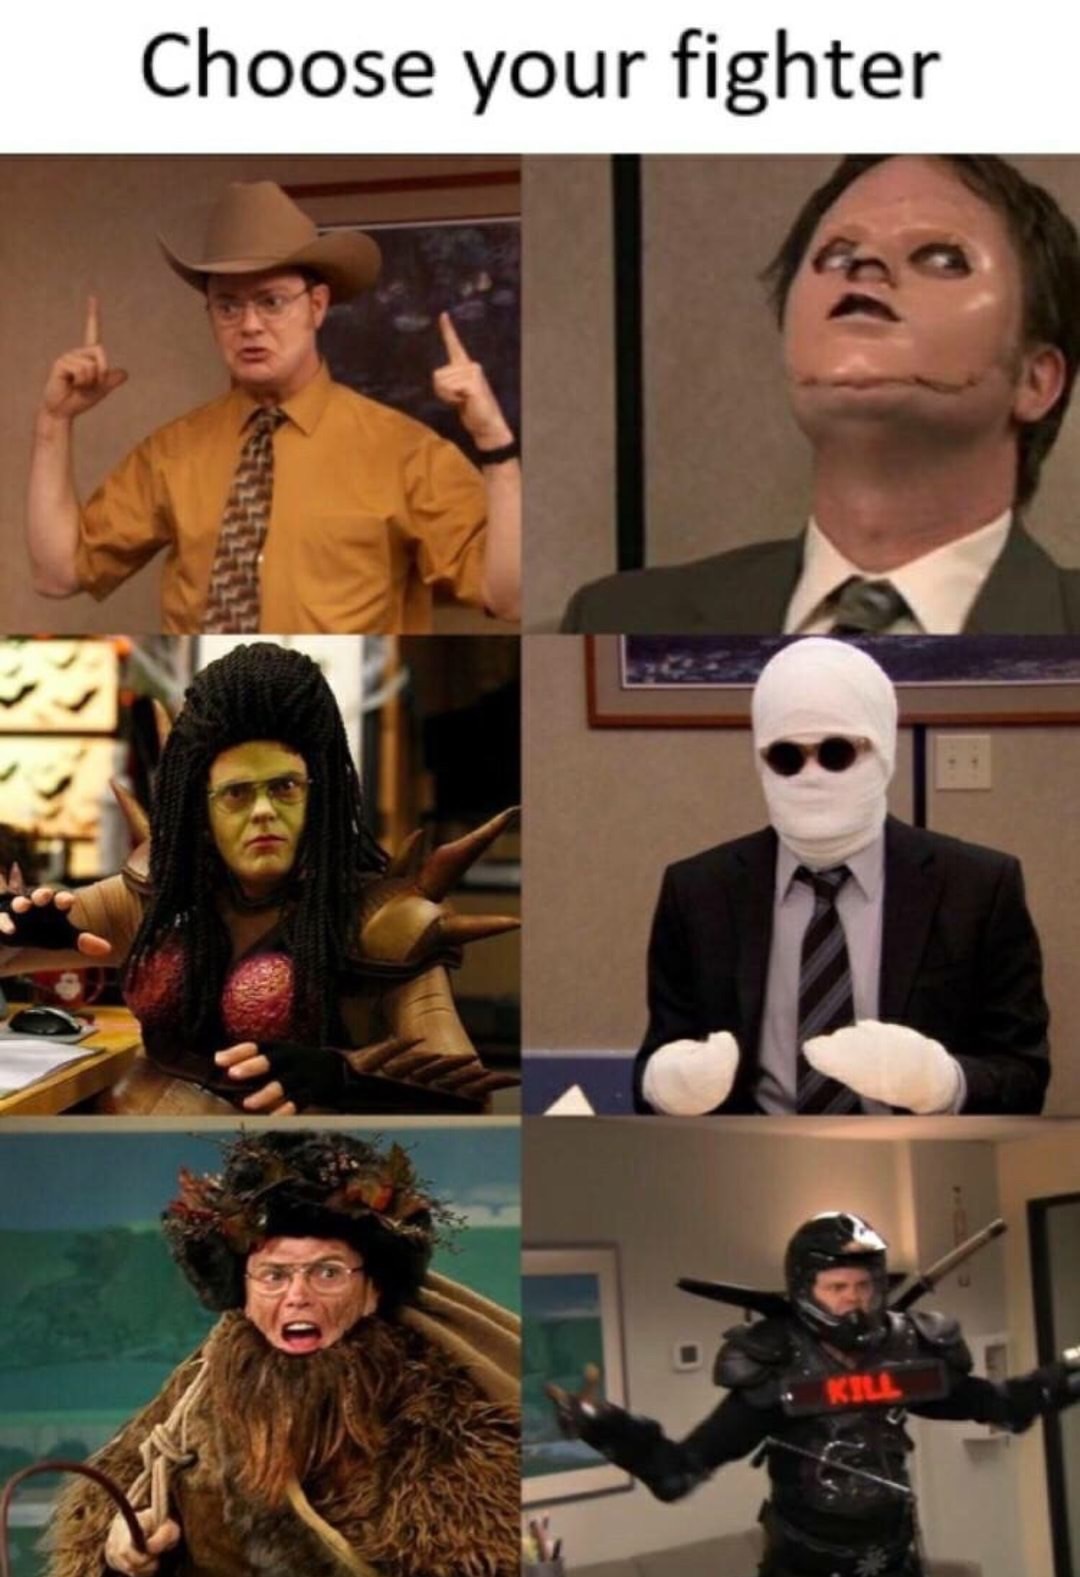 memes - choose your fighter the office - Choose your fighter